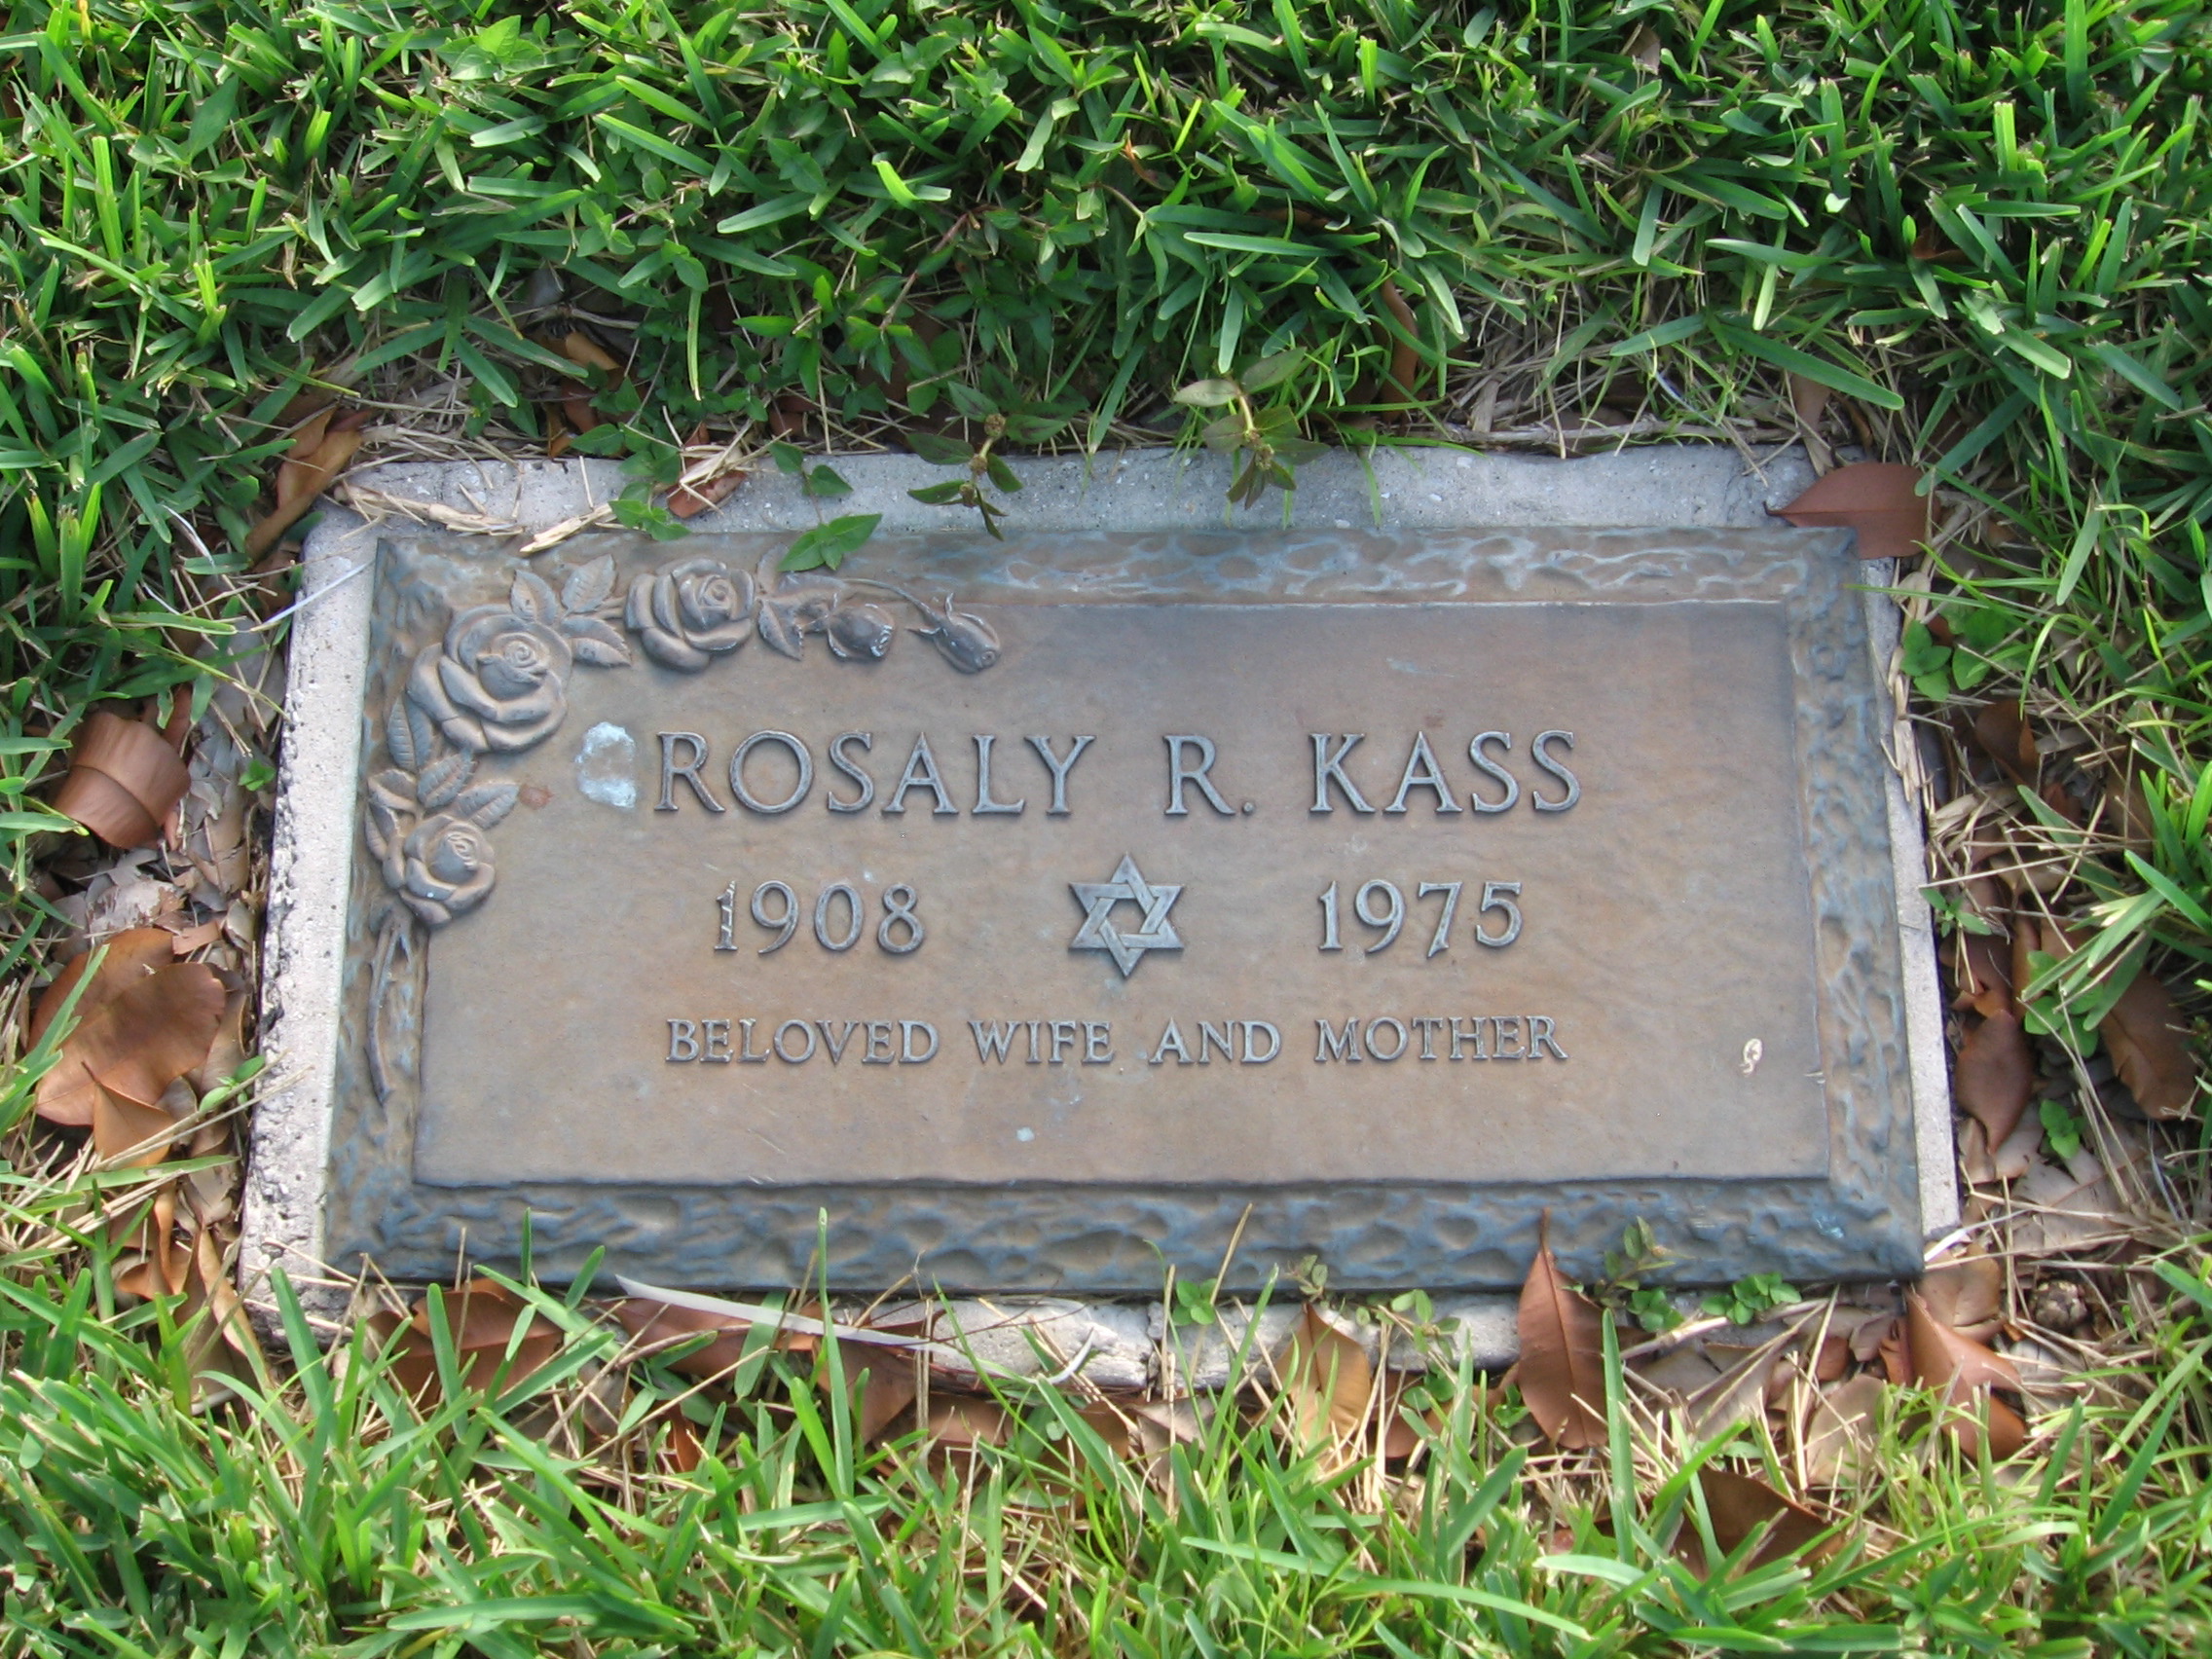 Rosaly R Kass